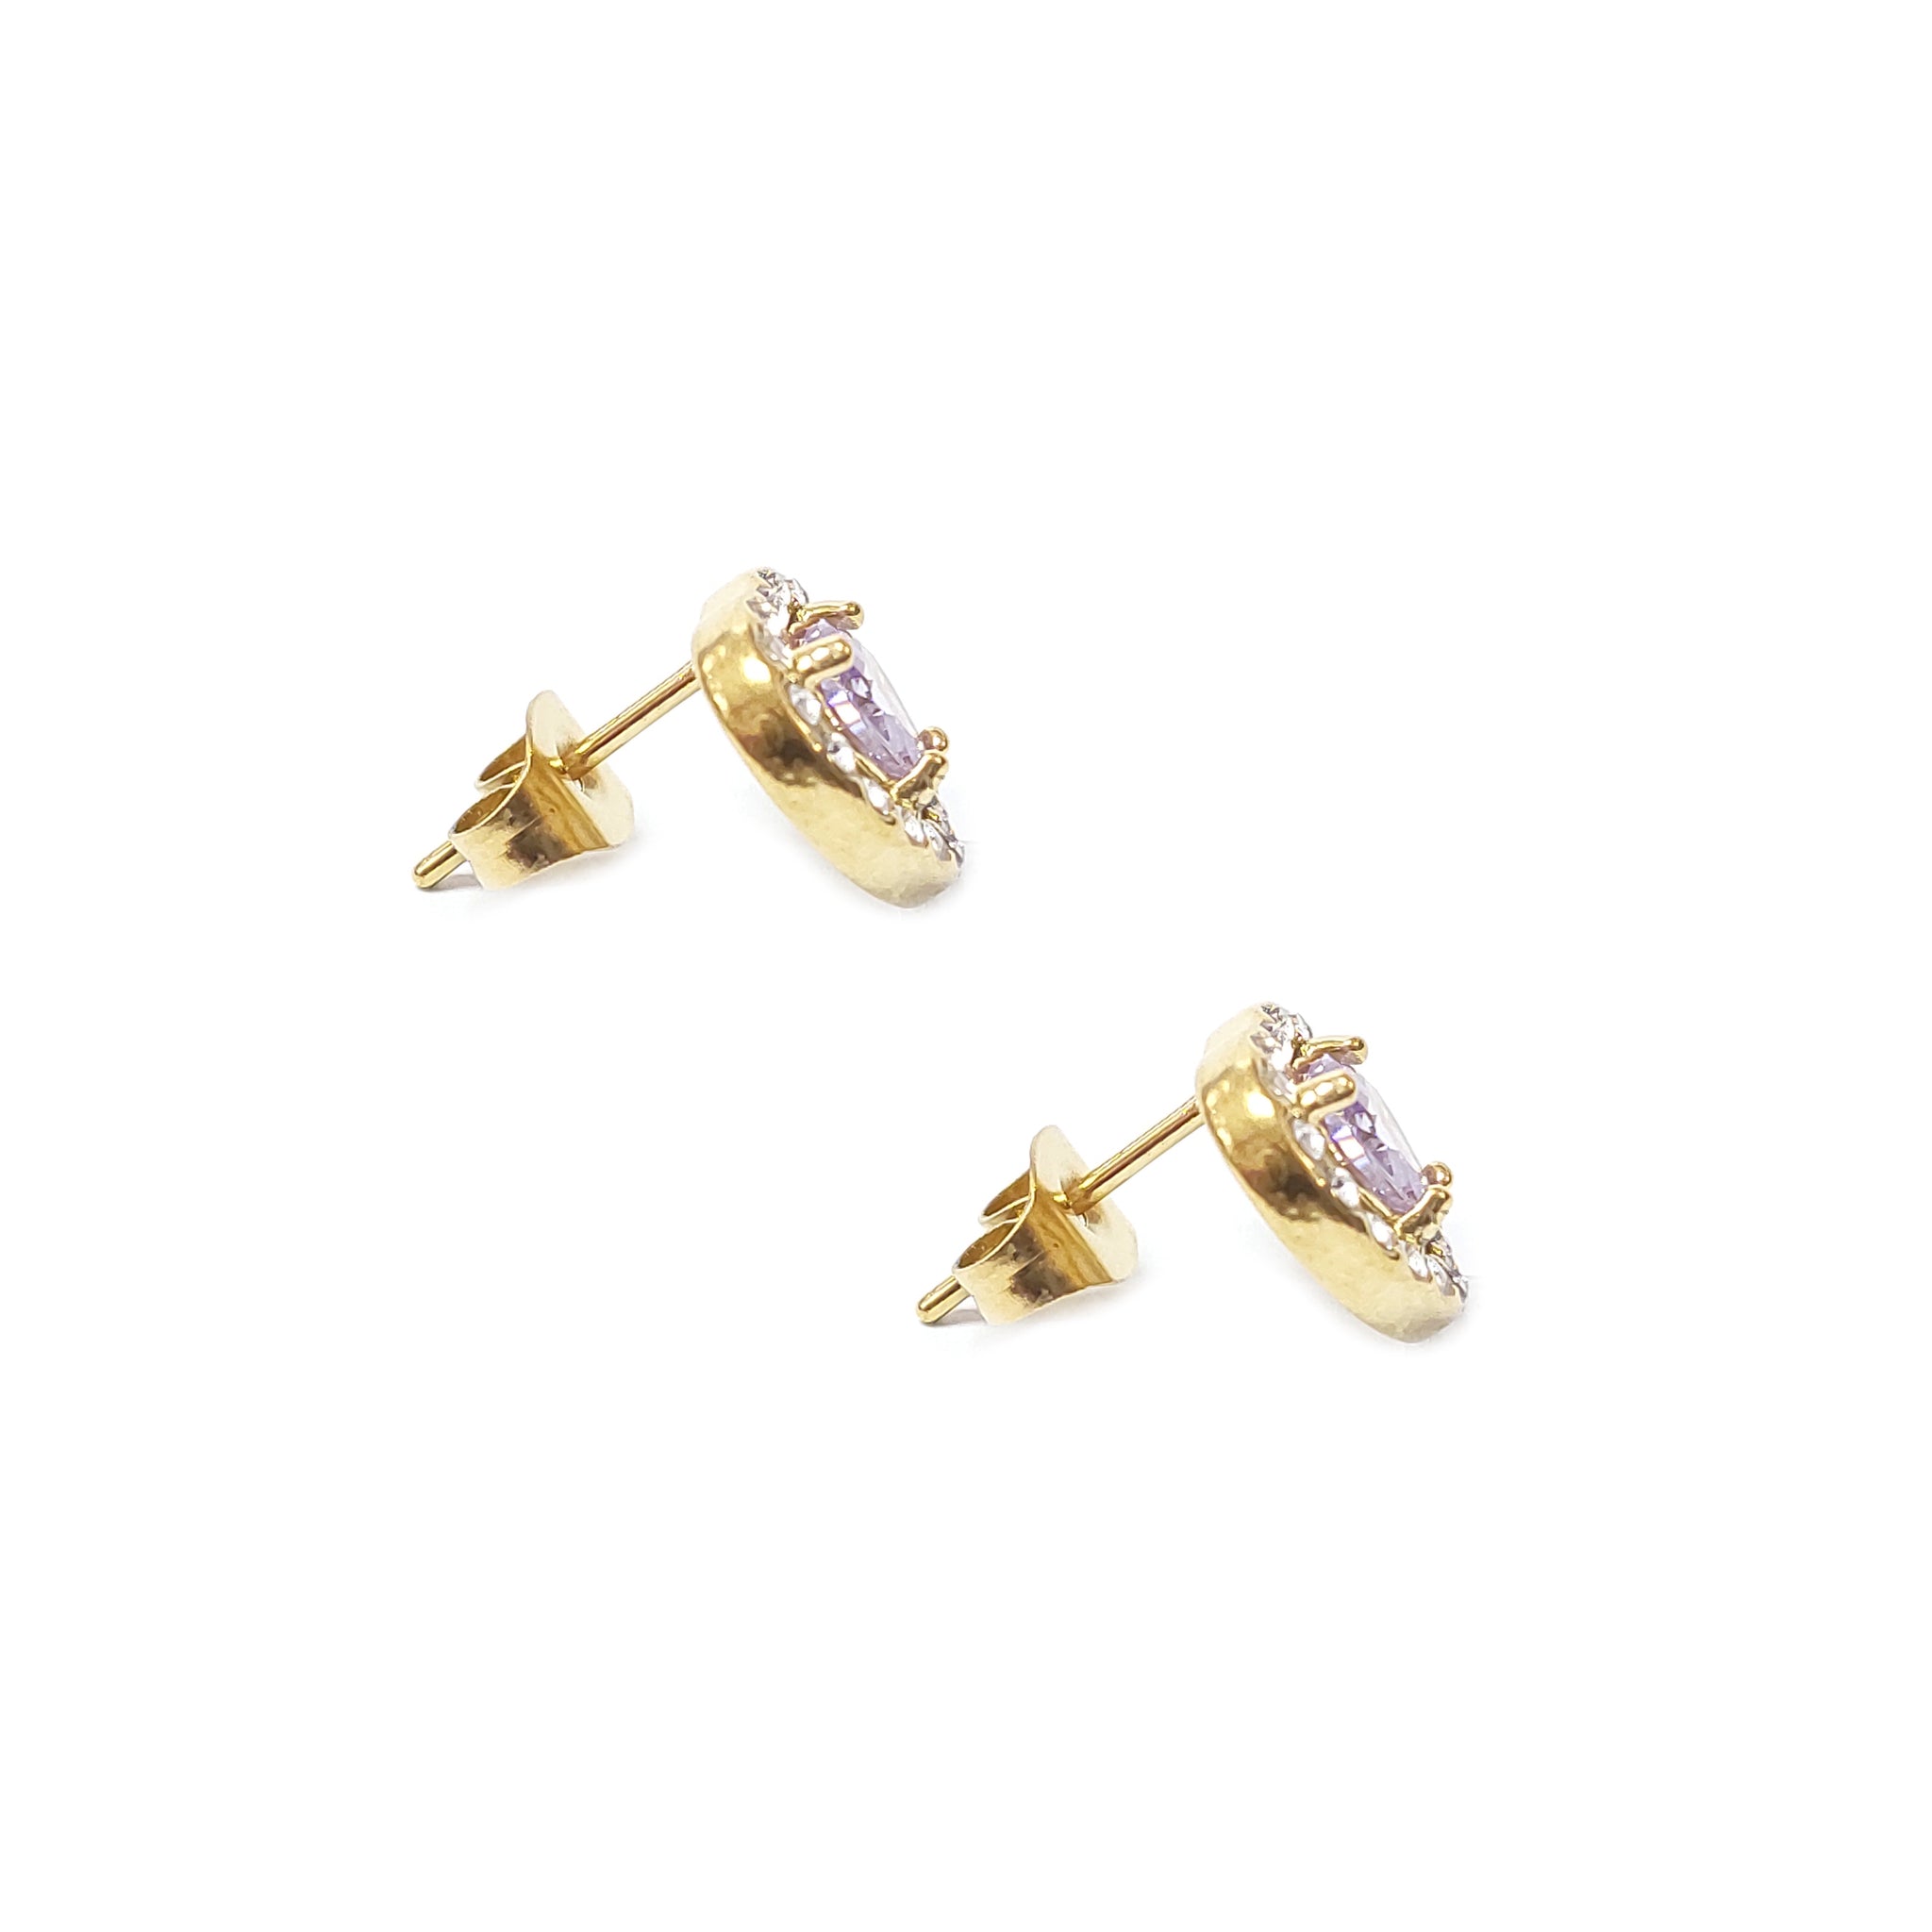 ESE 7928: All IPG Enclosed Cz-Studded Light Purple Heart Cz Earrings